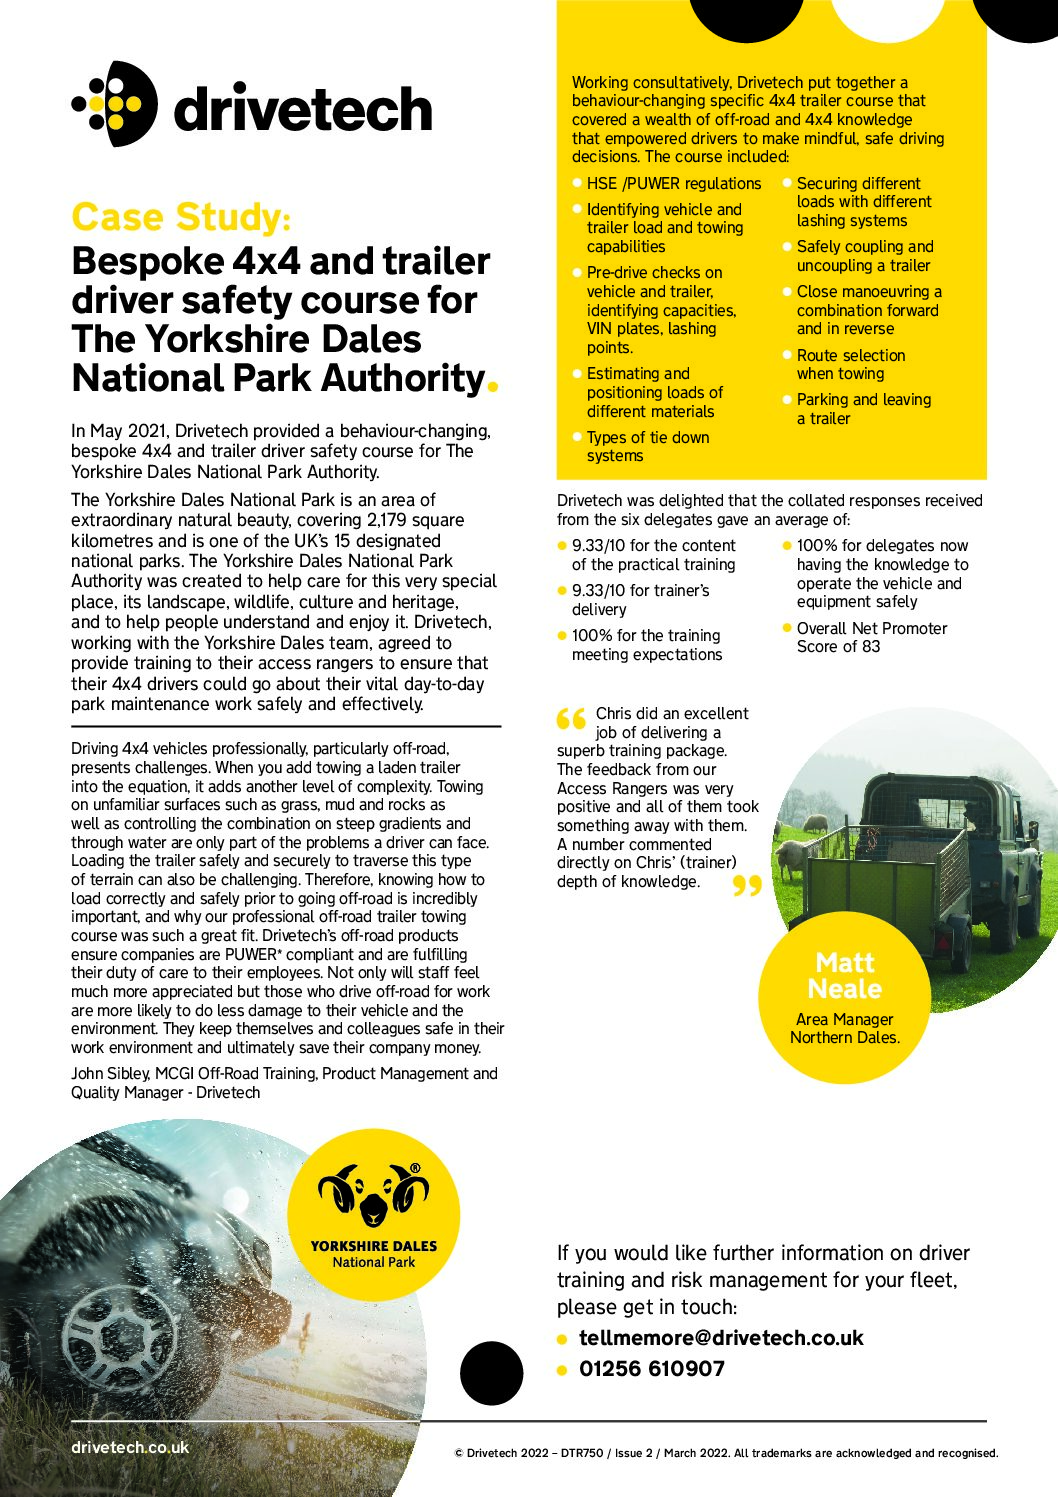 Bespoke 4×4 and Trailer Driver Safety Course for Yorkshire Dales National Park Authority